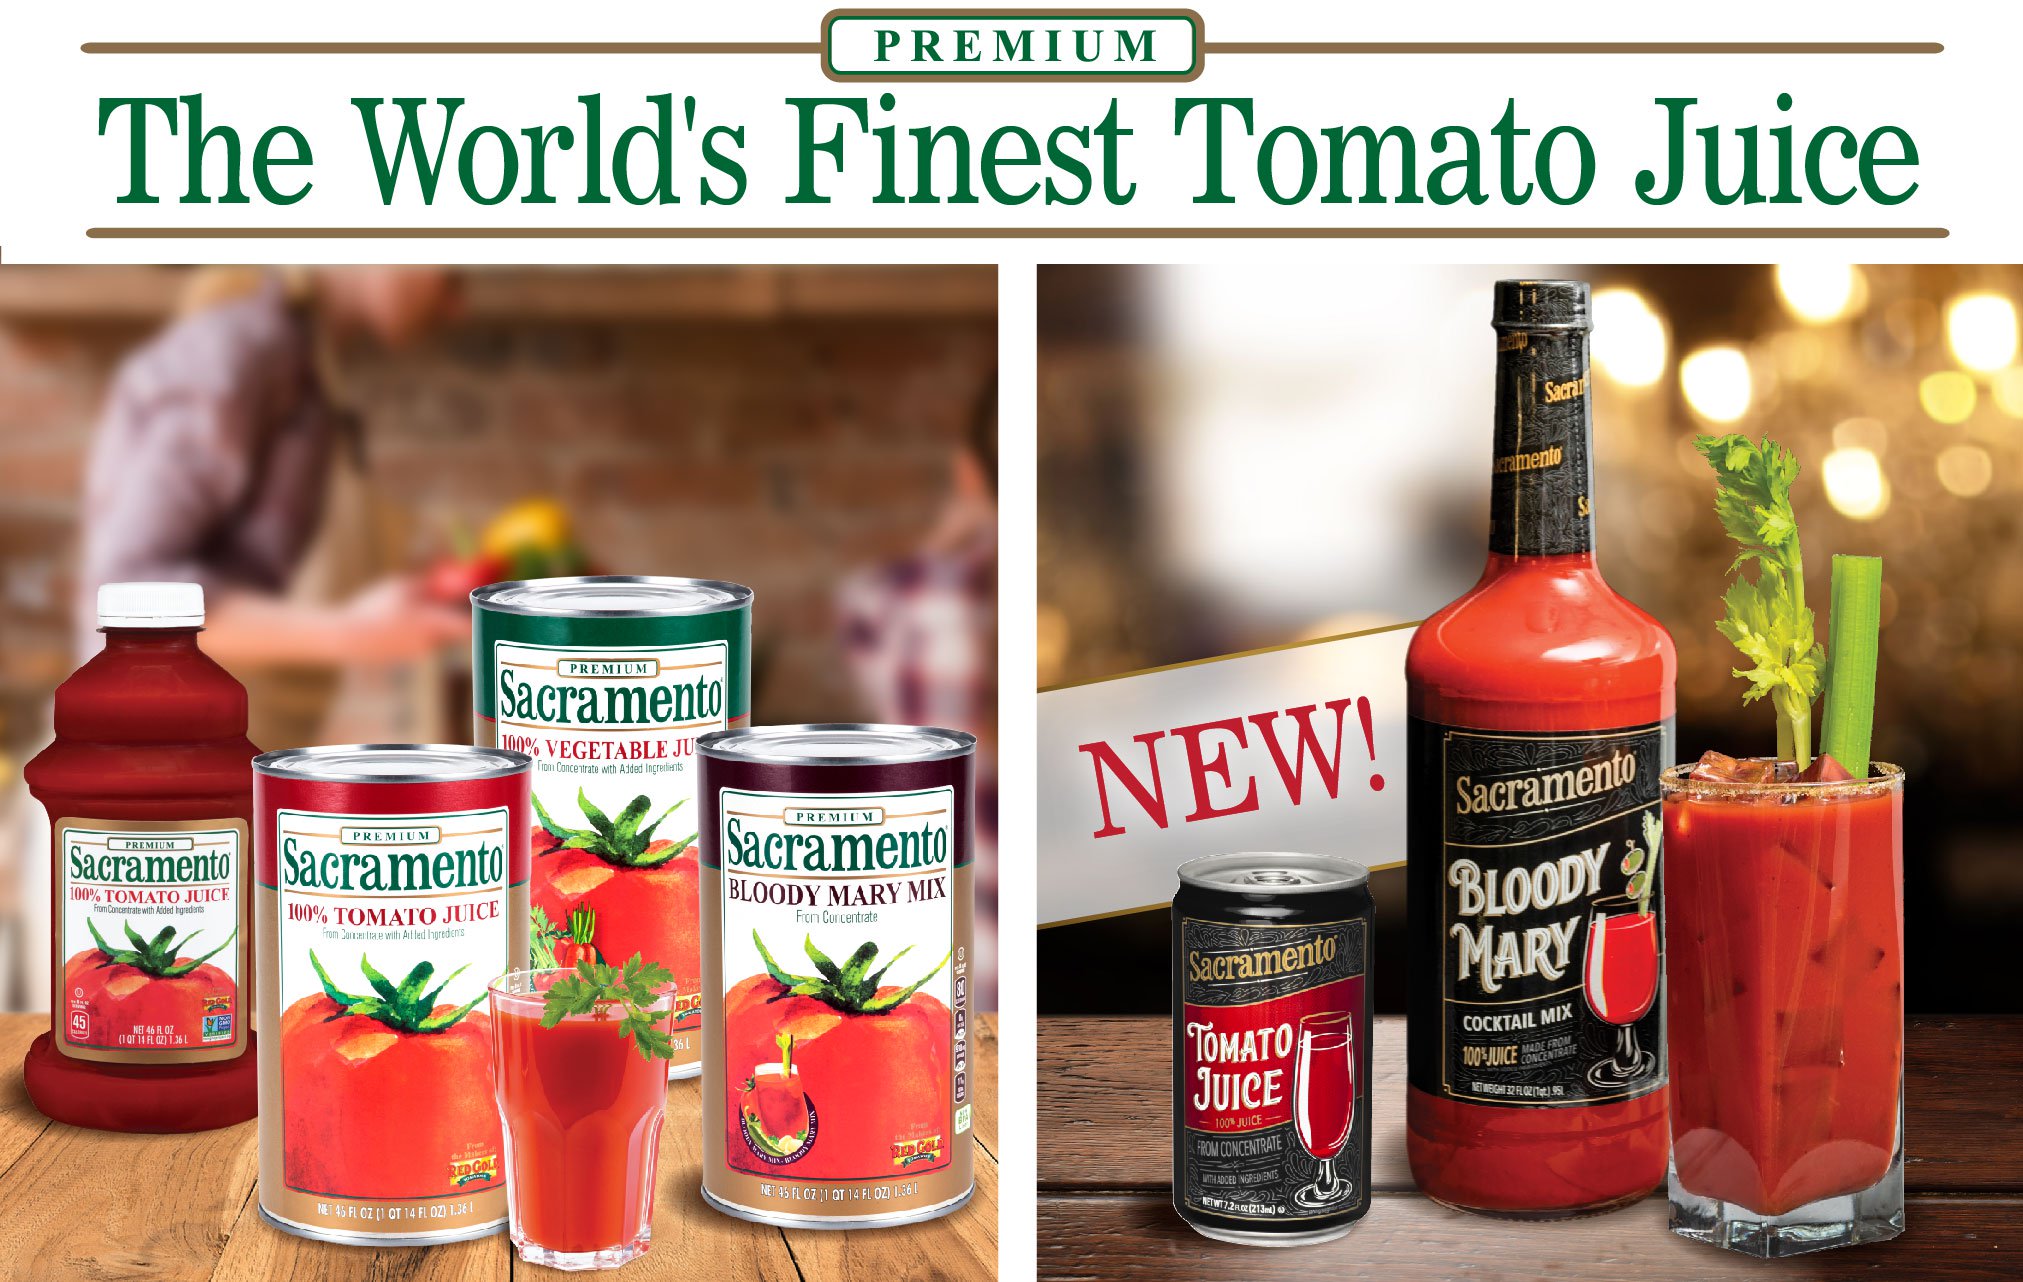 Line up of Sacramento Tomato Juice products Toamto Juice Bloody Mary Mix and Vegetable Juice